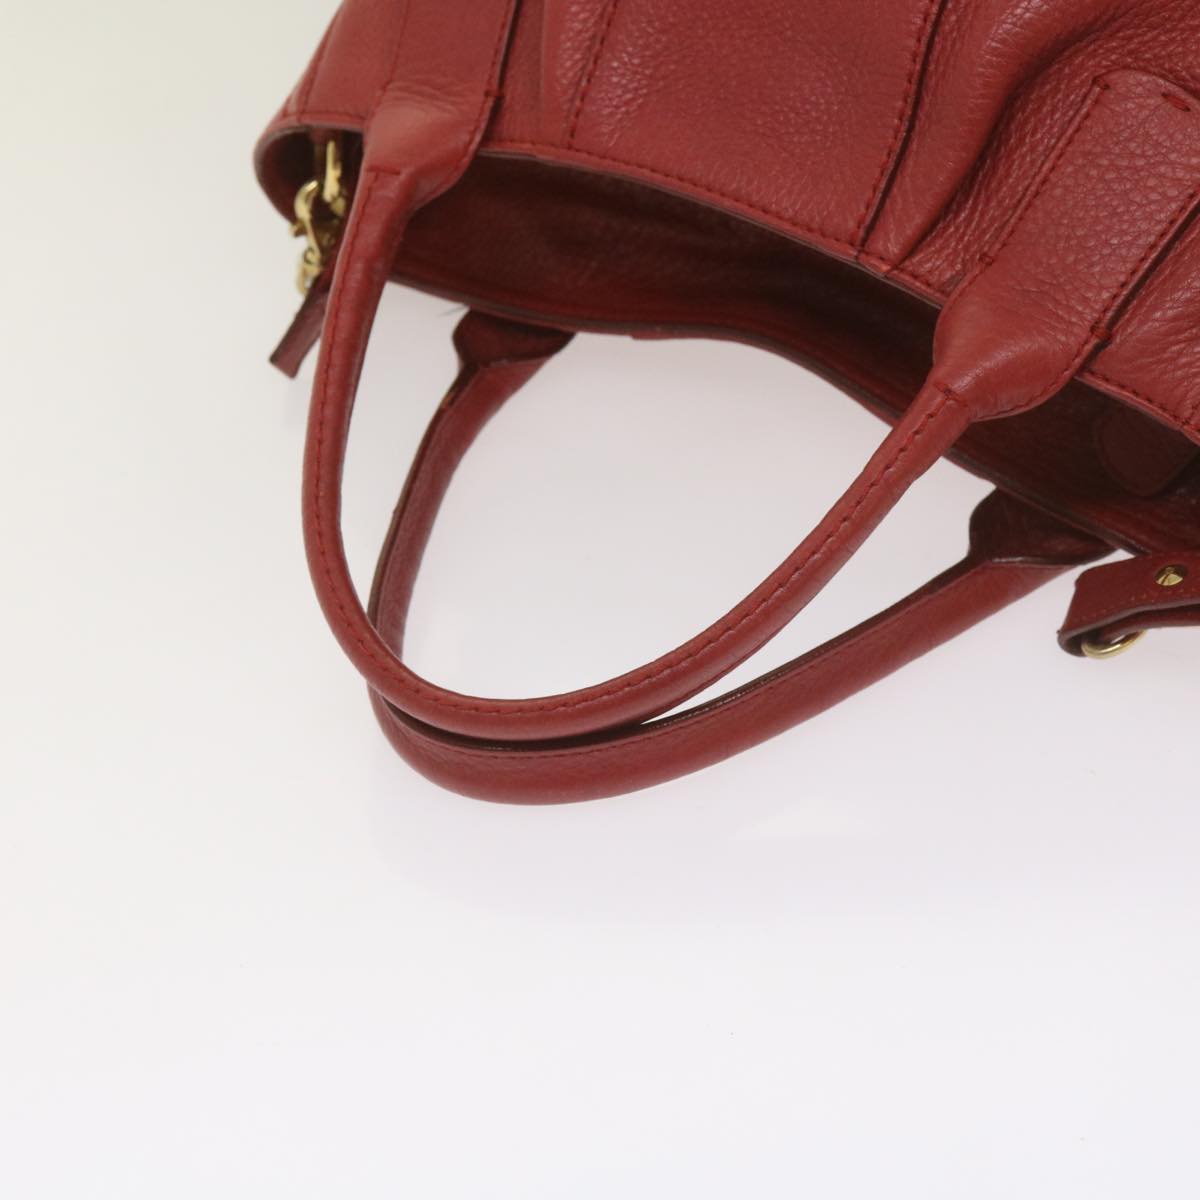 Salvatore Ferragamo Hand Bag Leather 2way Red Auth bs12366